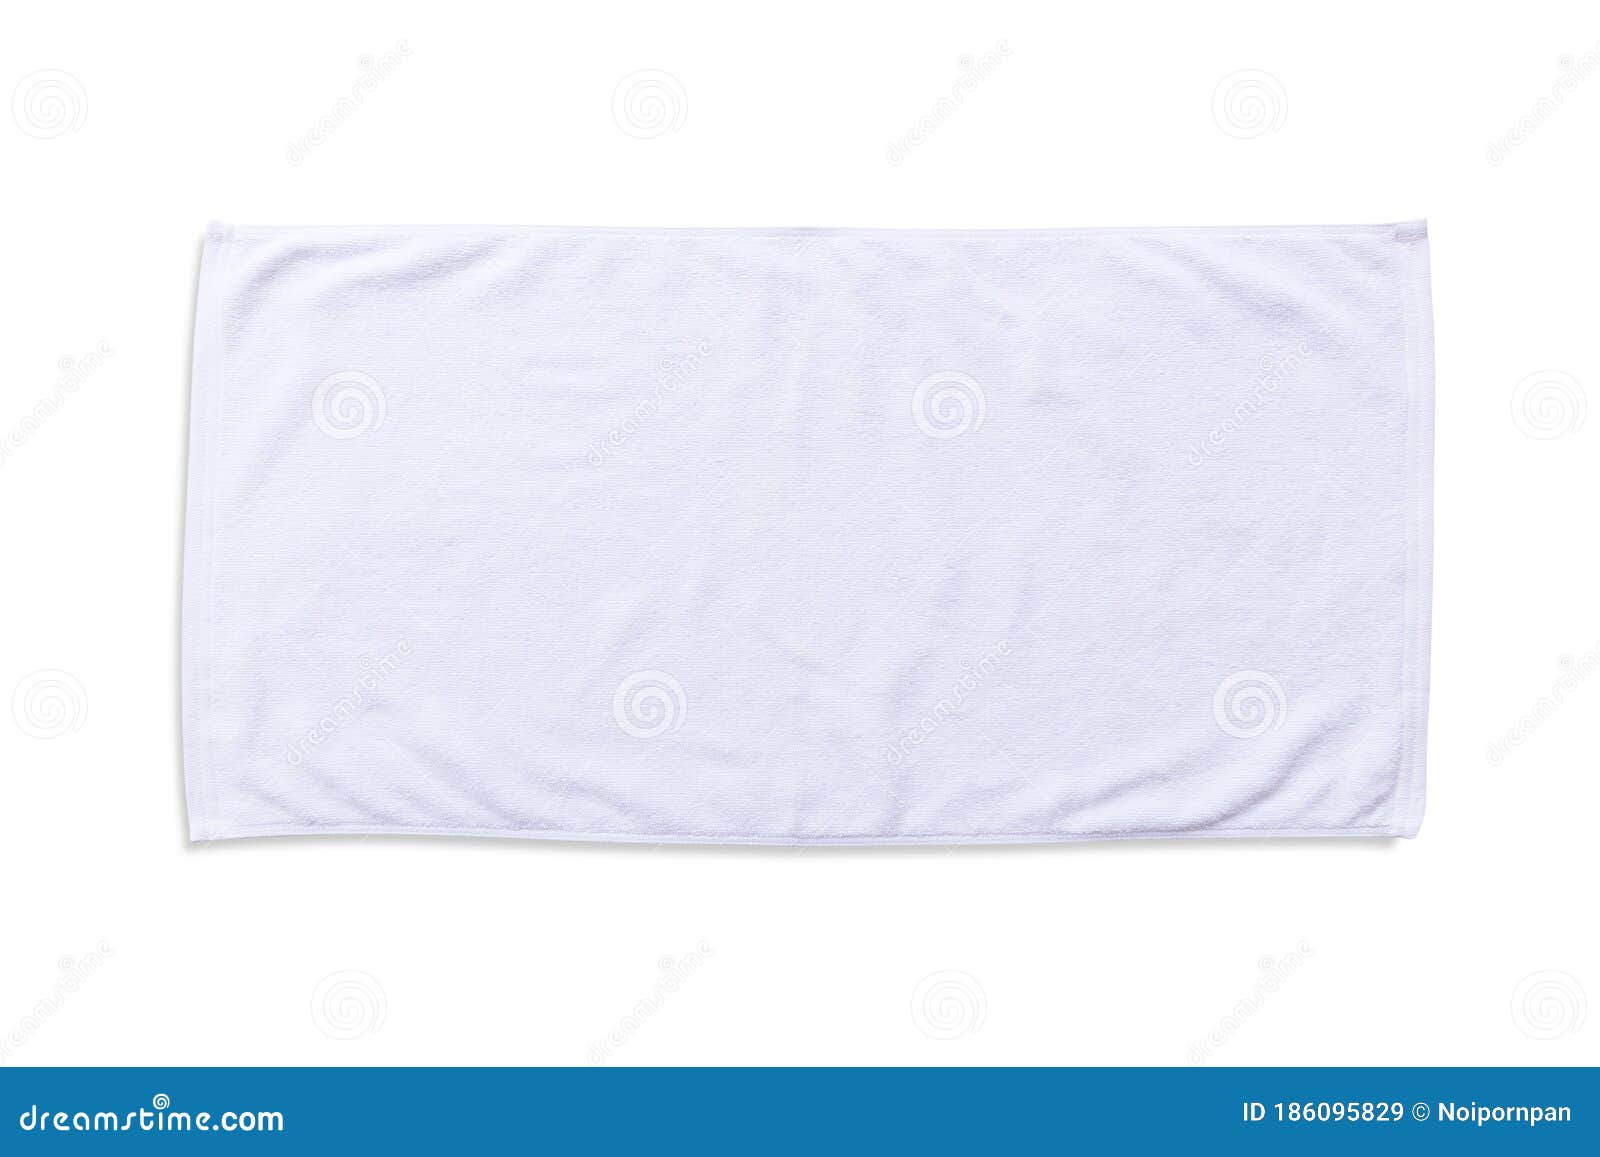 Download White Beach Towel Mock Up Isolated With Clipping Path On White Background Flat Lay Top View Stock Image Image Of Hotel Bathroom 186095829